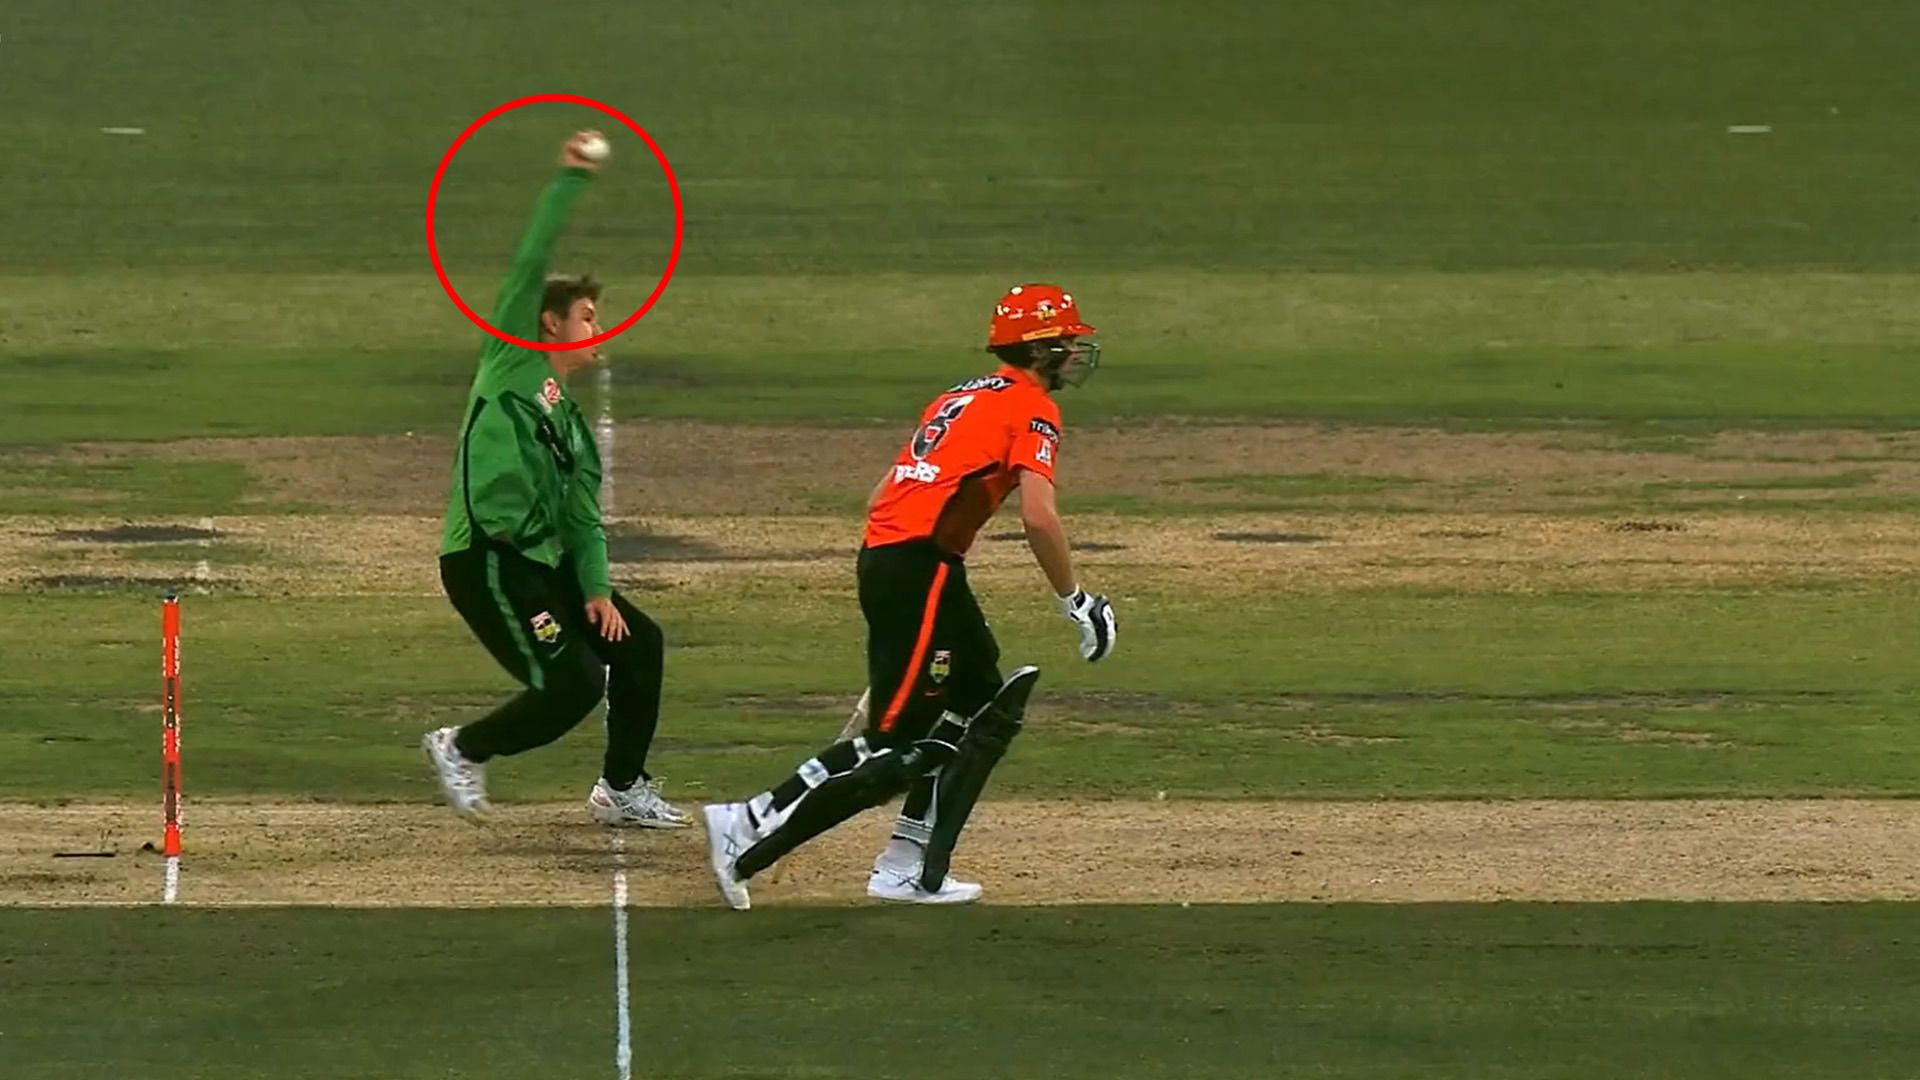 Adam Zampa had reached the top of his bowling action when Tom Rogers had left his crease.